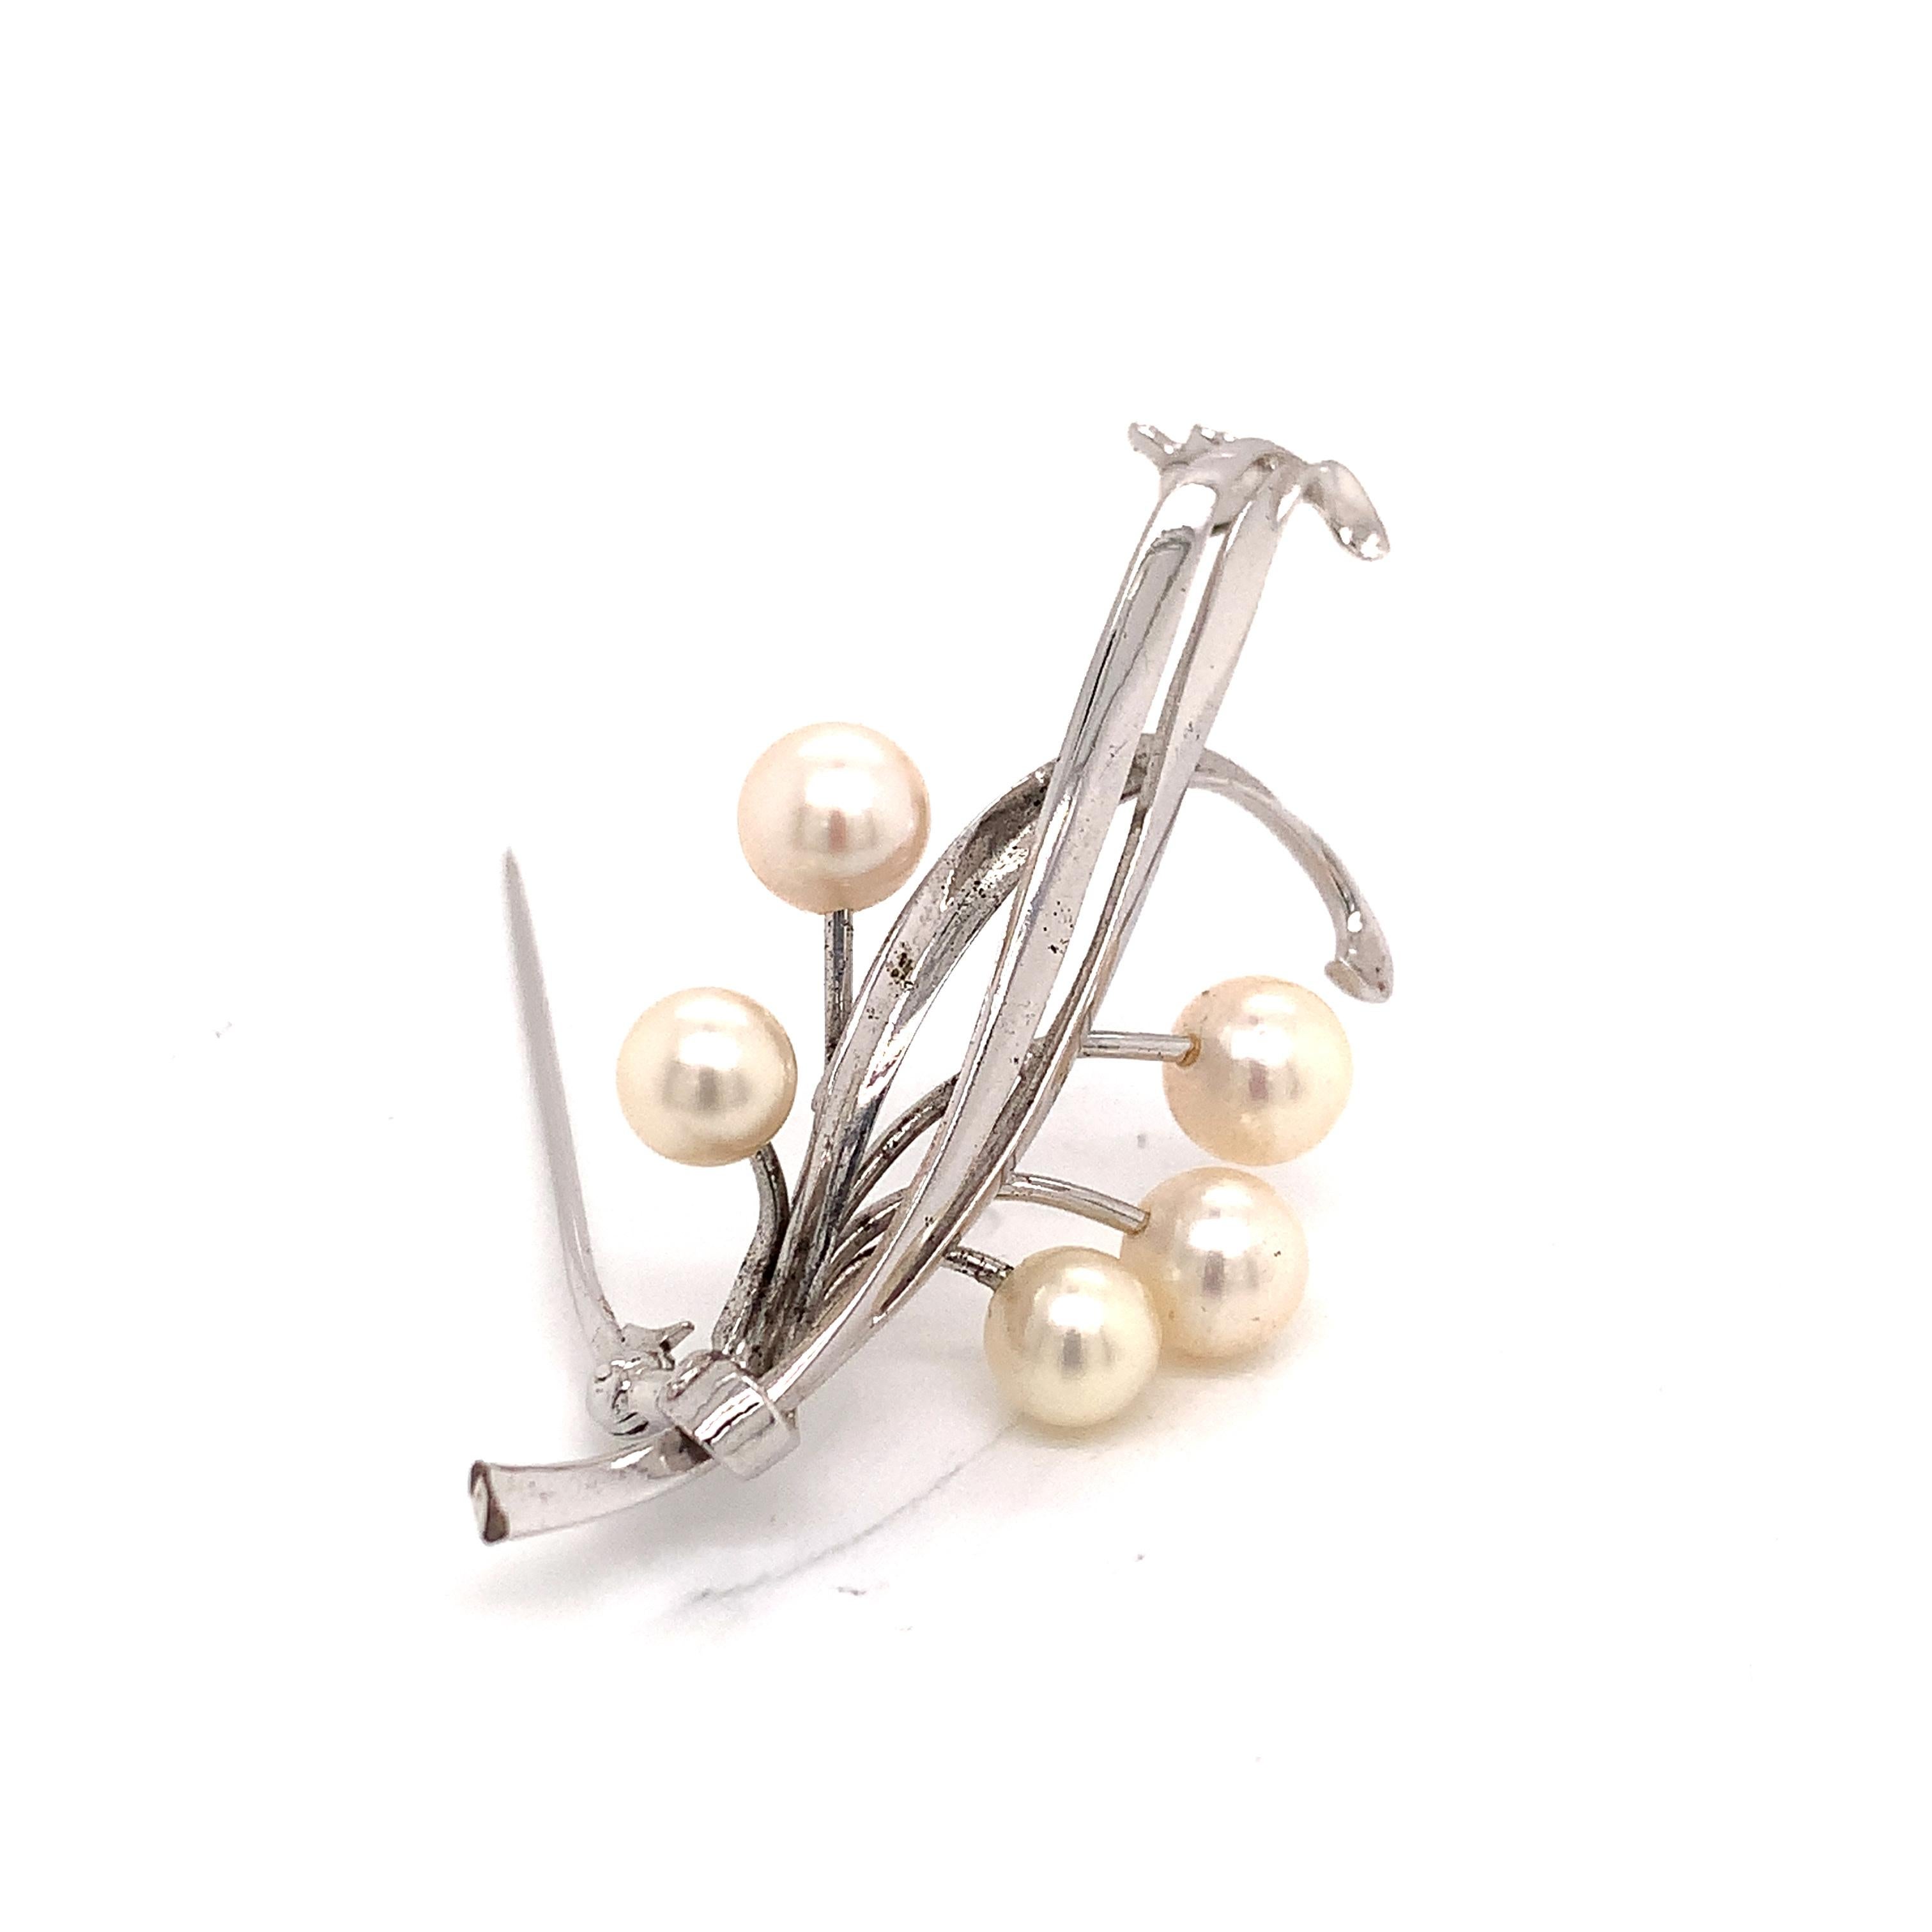 Mikimoto Estate Akoya Pearl Brooch Pin Sterling Silver 5.43 Gr For Sale 2